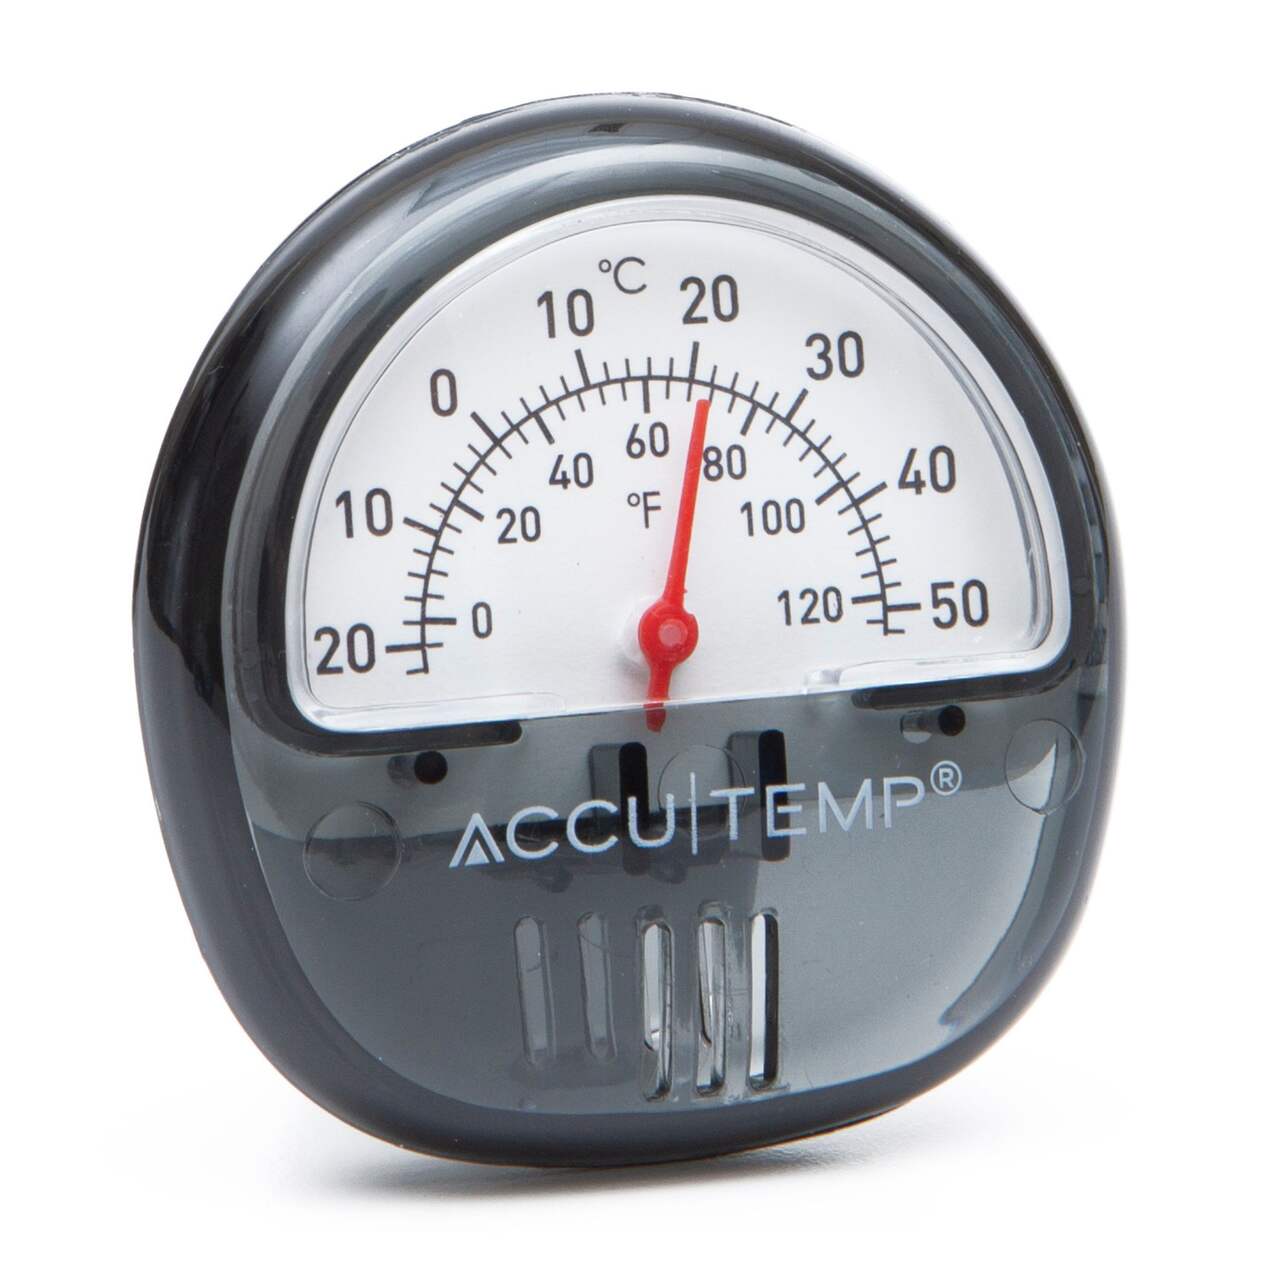 https://media-www.canadiantire.ca/product/living/kitchen/kitchen-tools-thermometers/0429123/accutemp-mini-thermometer--371807cf-6080-4856-bab0-e885f4e3b52c-jpgrendition.jpg?imdensity=1&imwidth=640&impolicy=mZoom